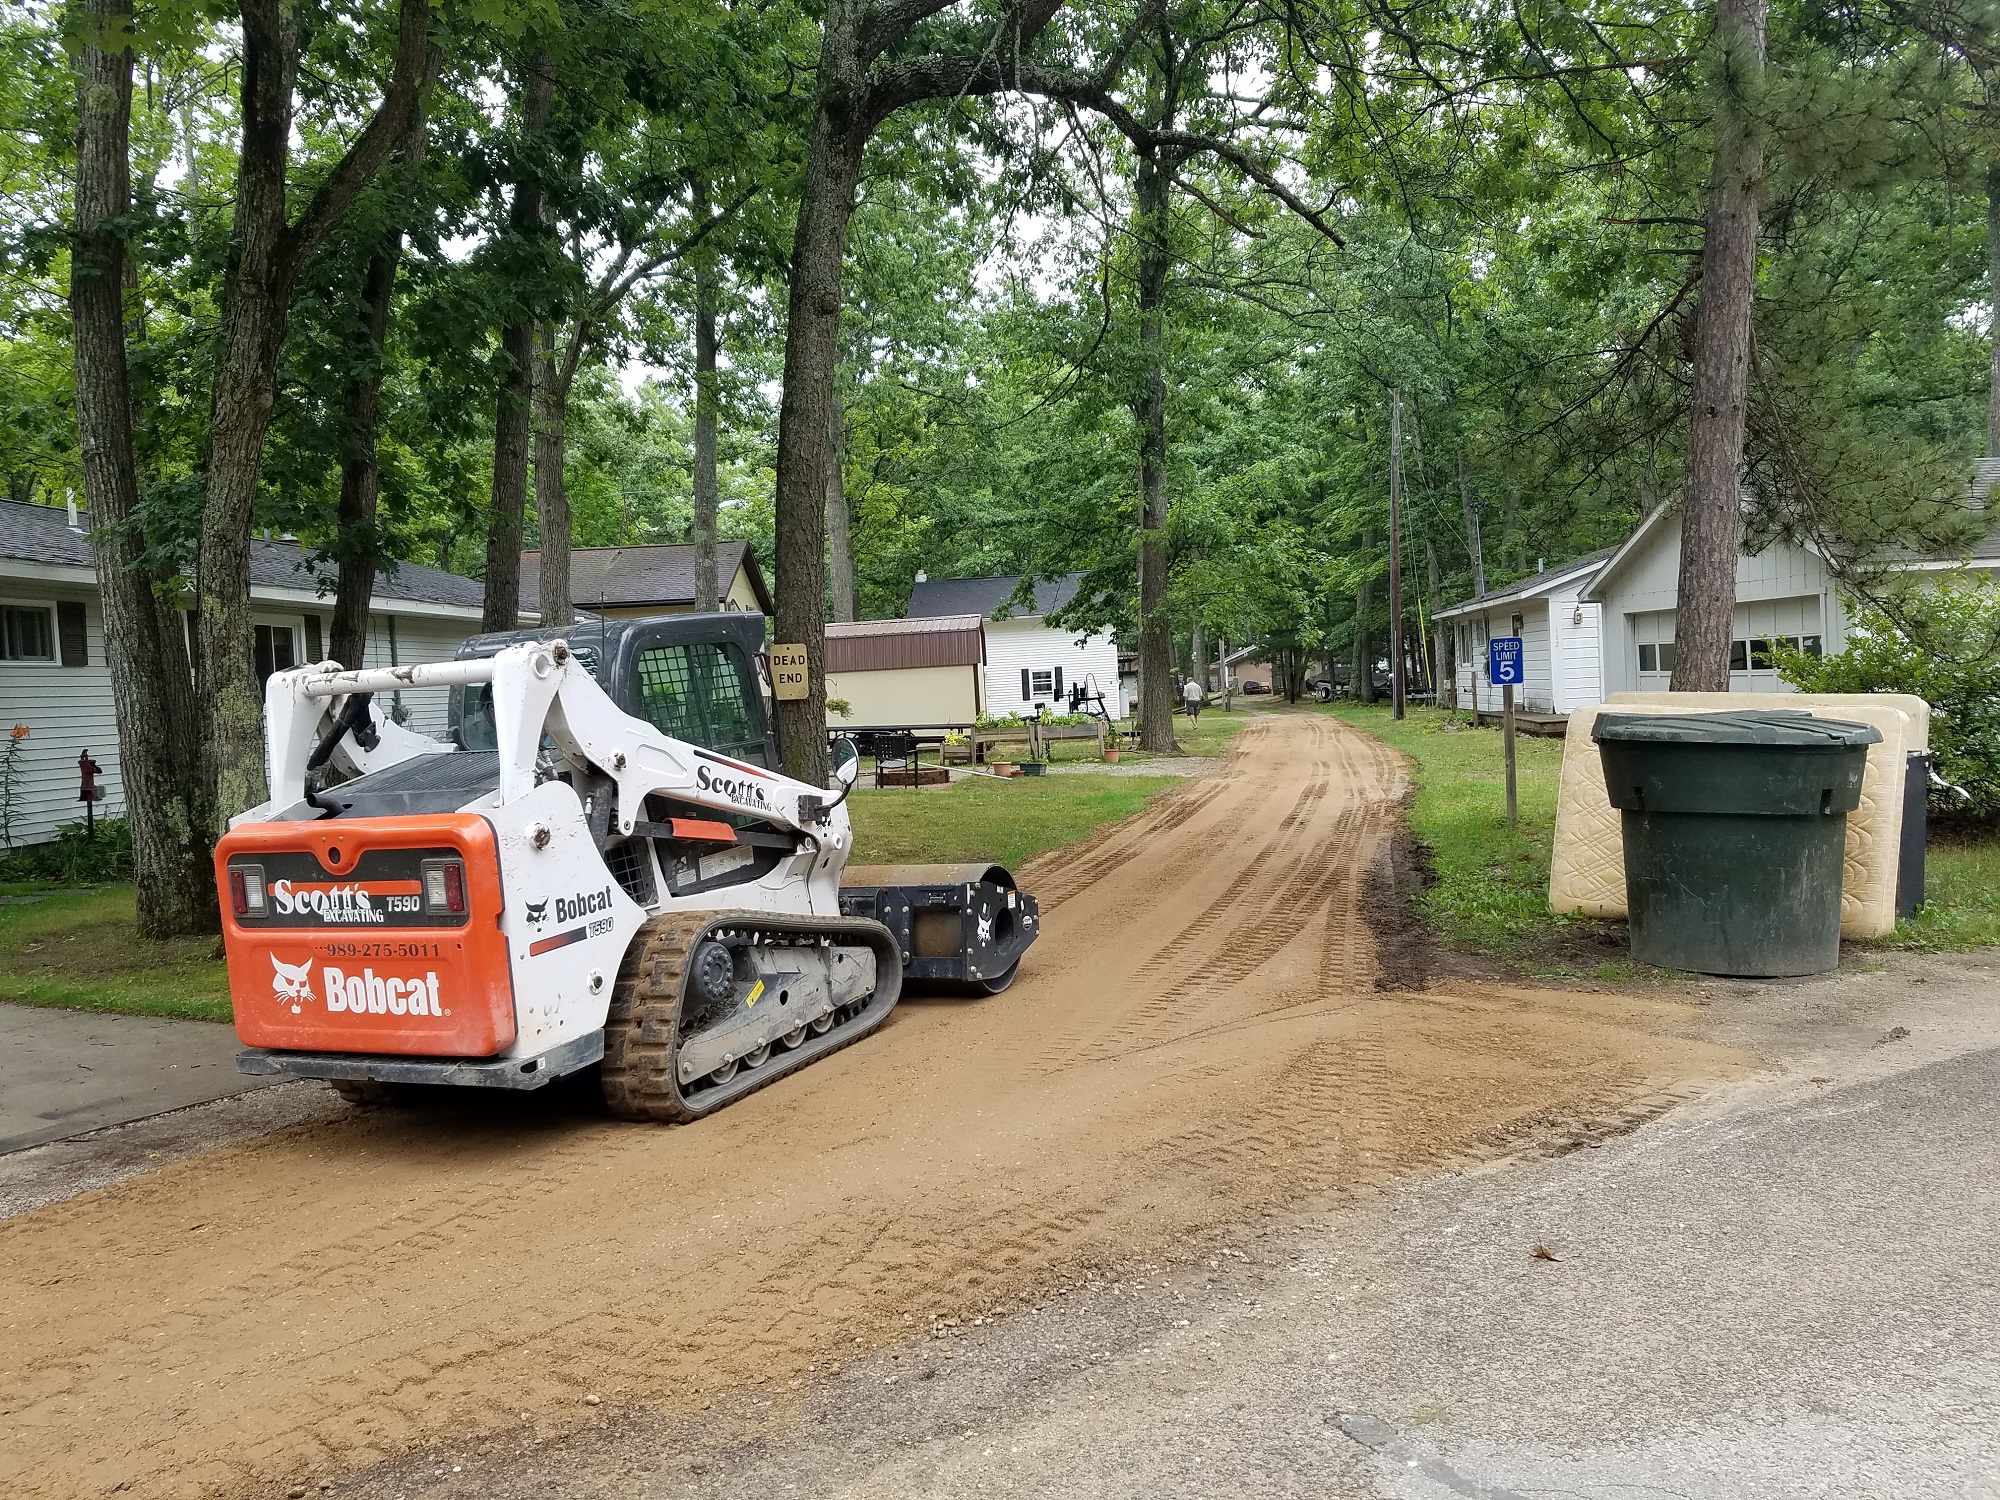 Scott's Excavating and Construction 554 W Federal Hwy, Roscommon Michigan 48653